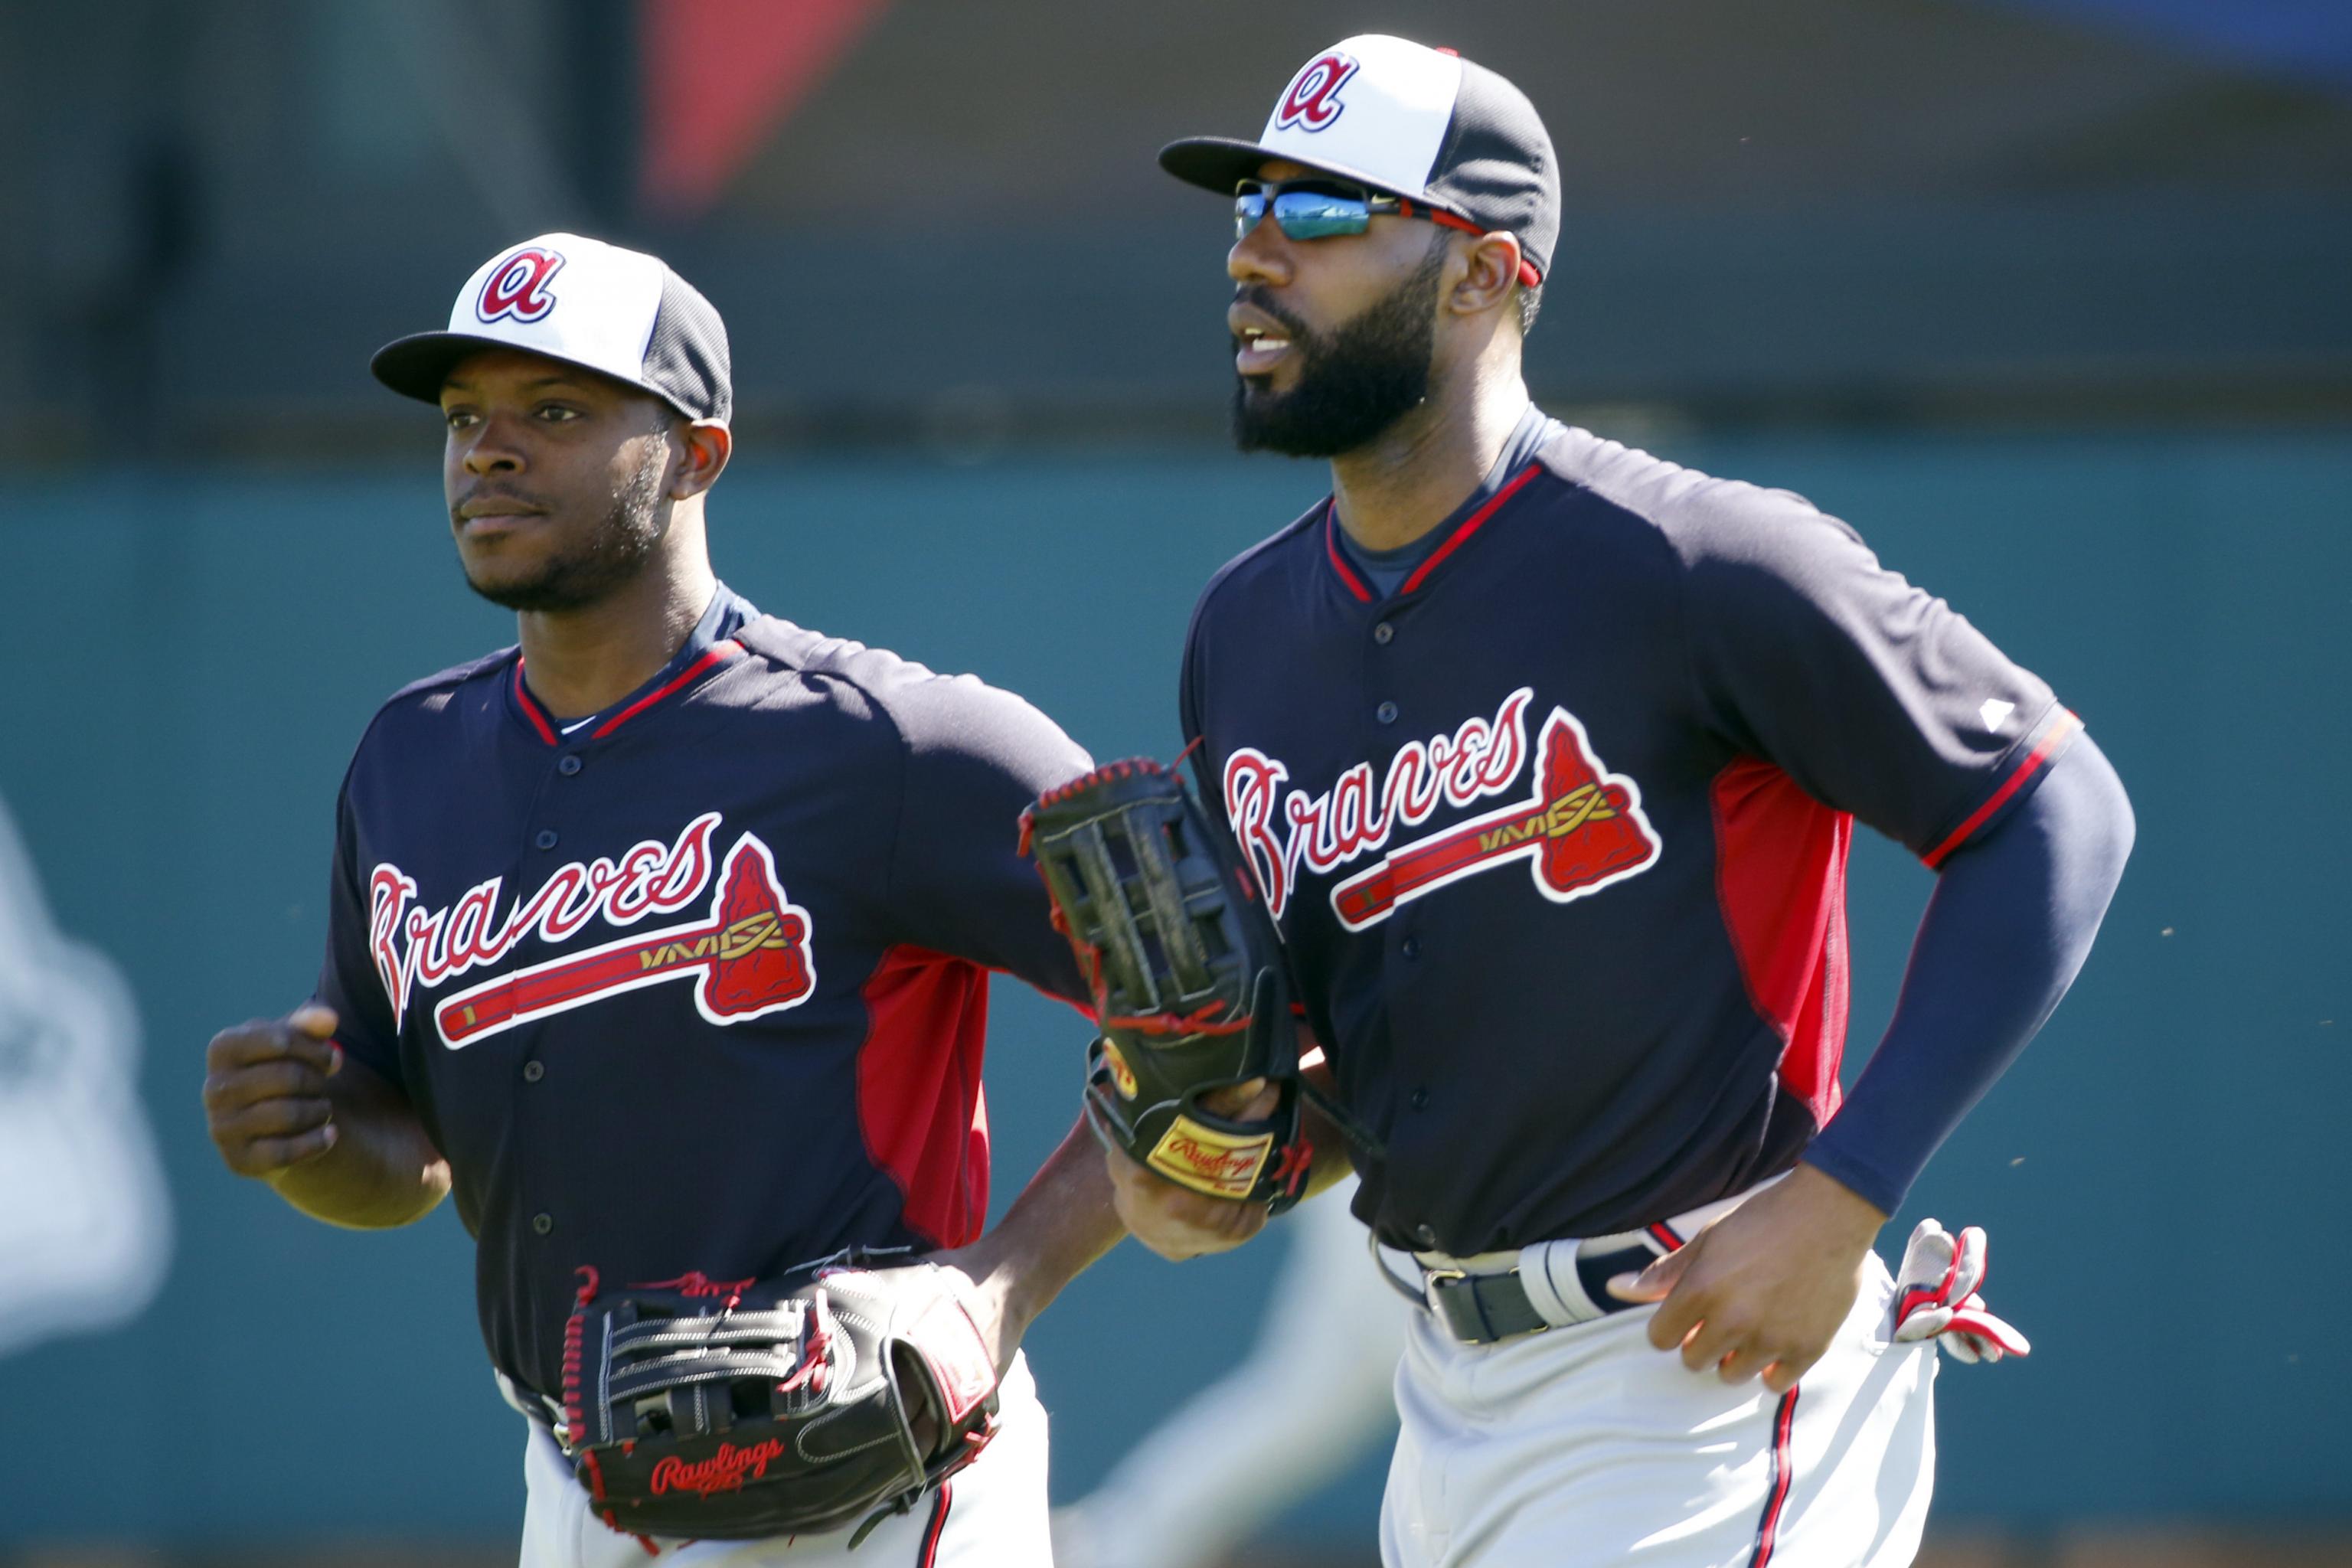 Let's go braves!, Article posted by Lee Cox